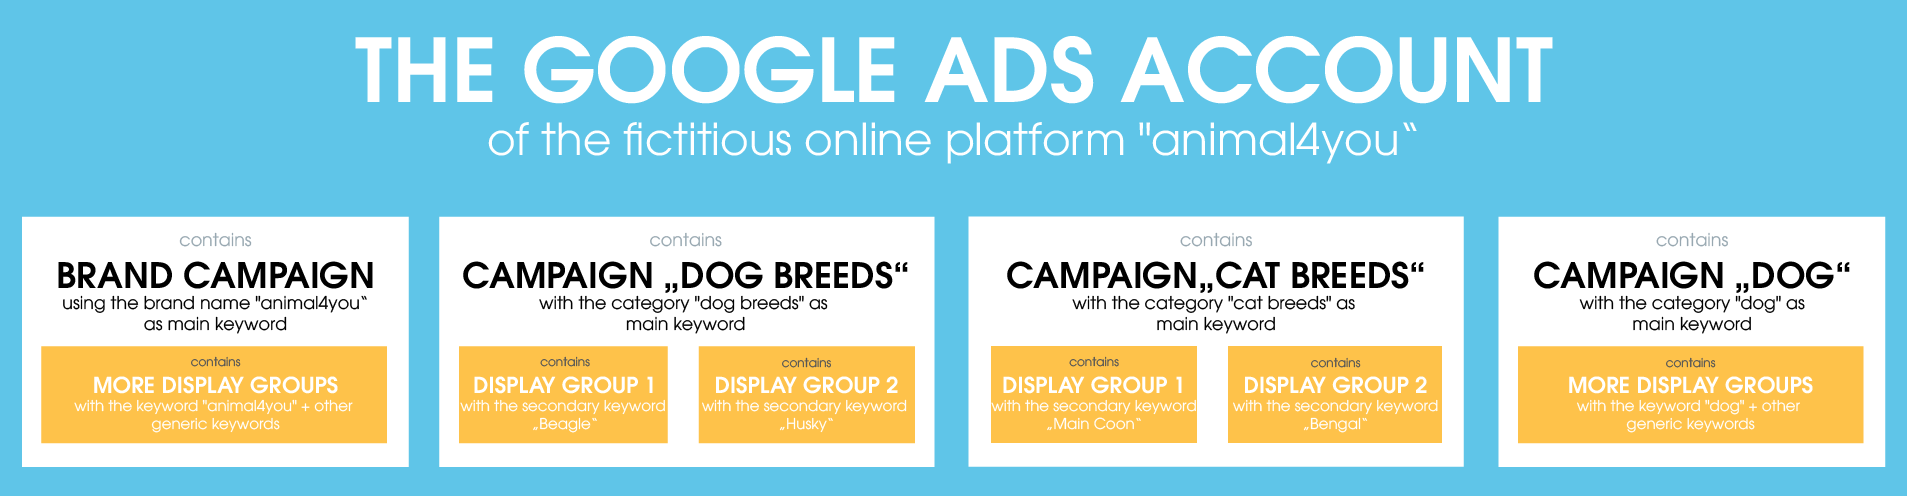 In the picture you can see an exemplary structure of a Google Ads account. This is set up for the fictitious online platform "animal4you". Therefore it includes different campaigns like the brand campaign and campaigns for dog breeds, cat breeds, etc. Below the campaigns you will find the different ad groups.